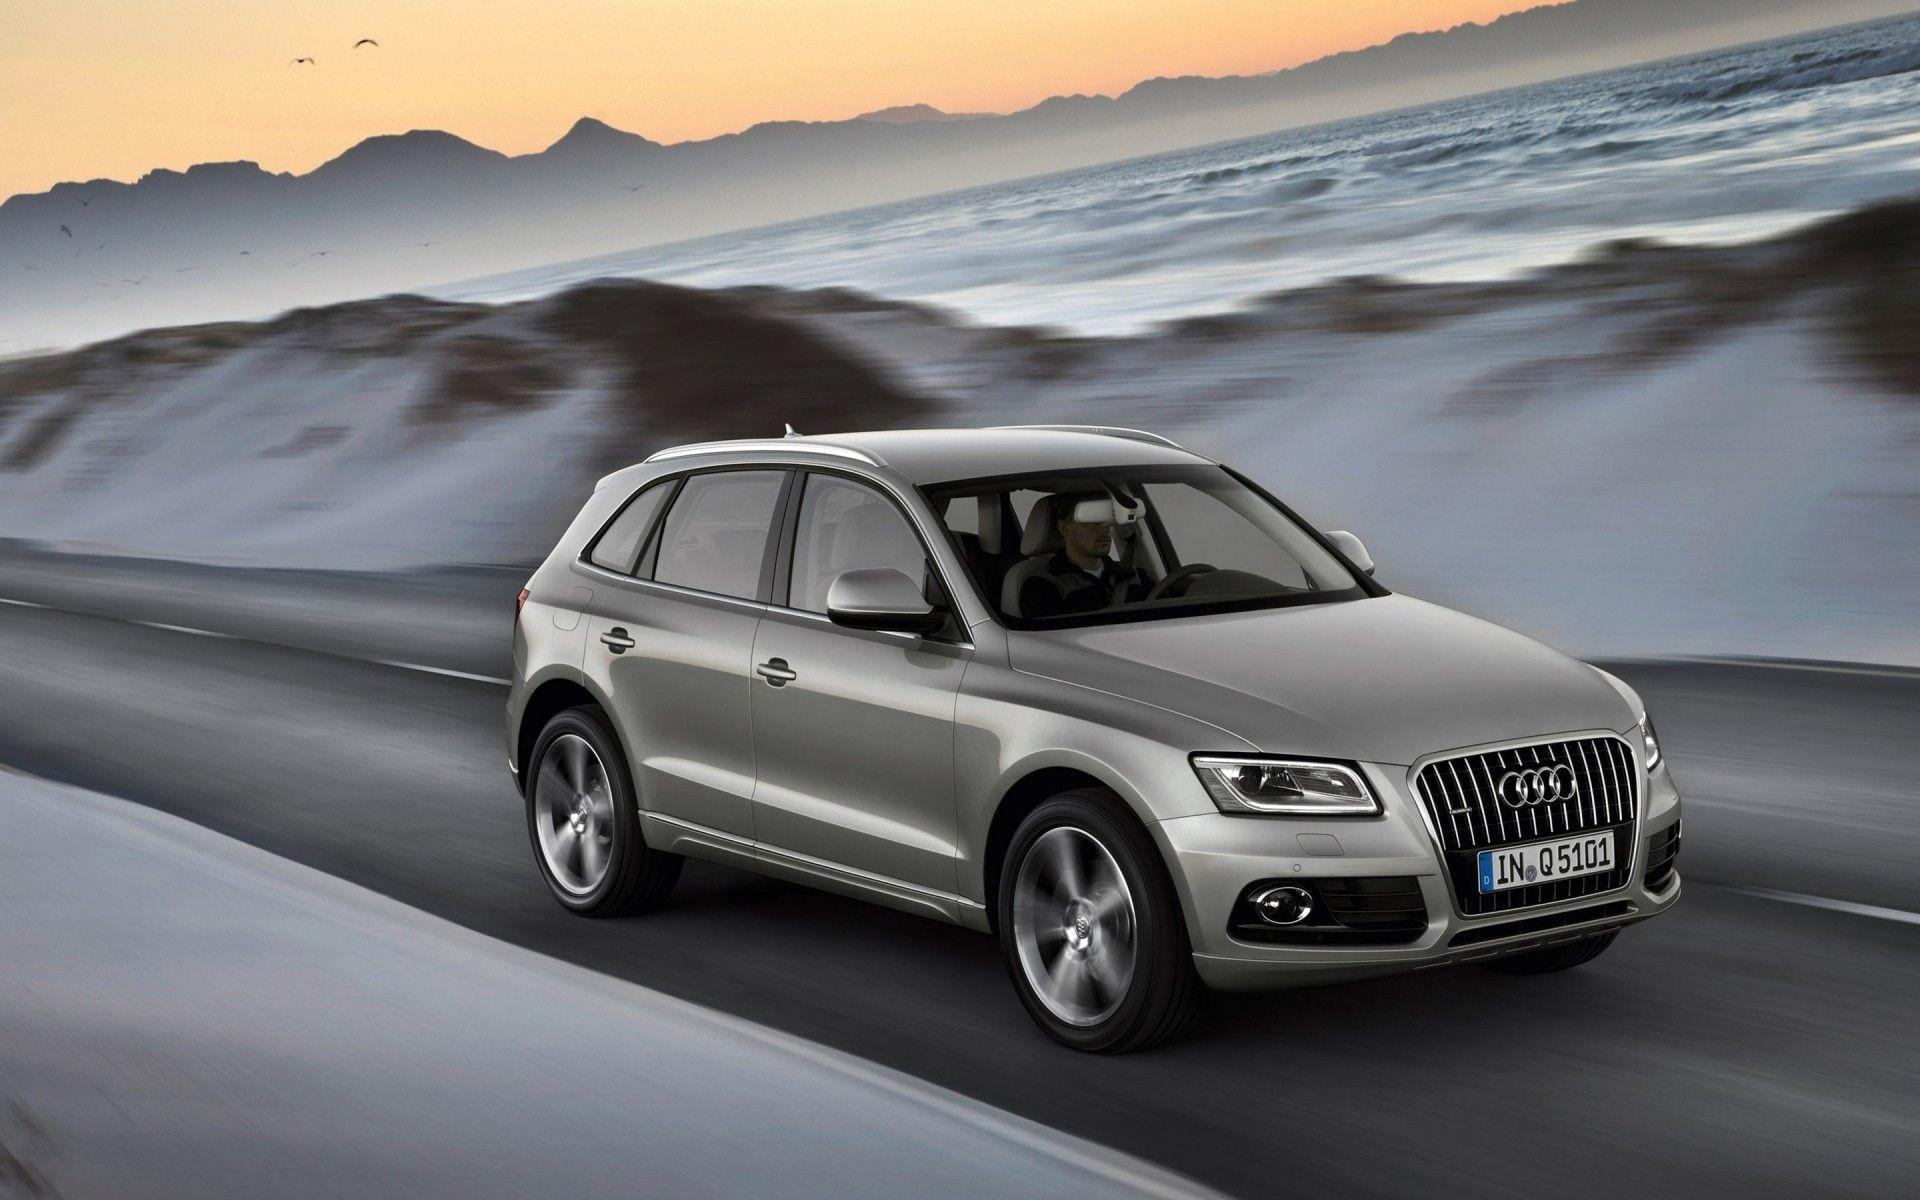 Audi Q5. Android wallpaper for free